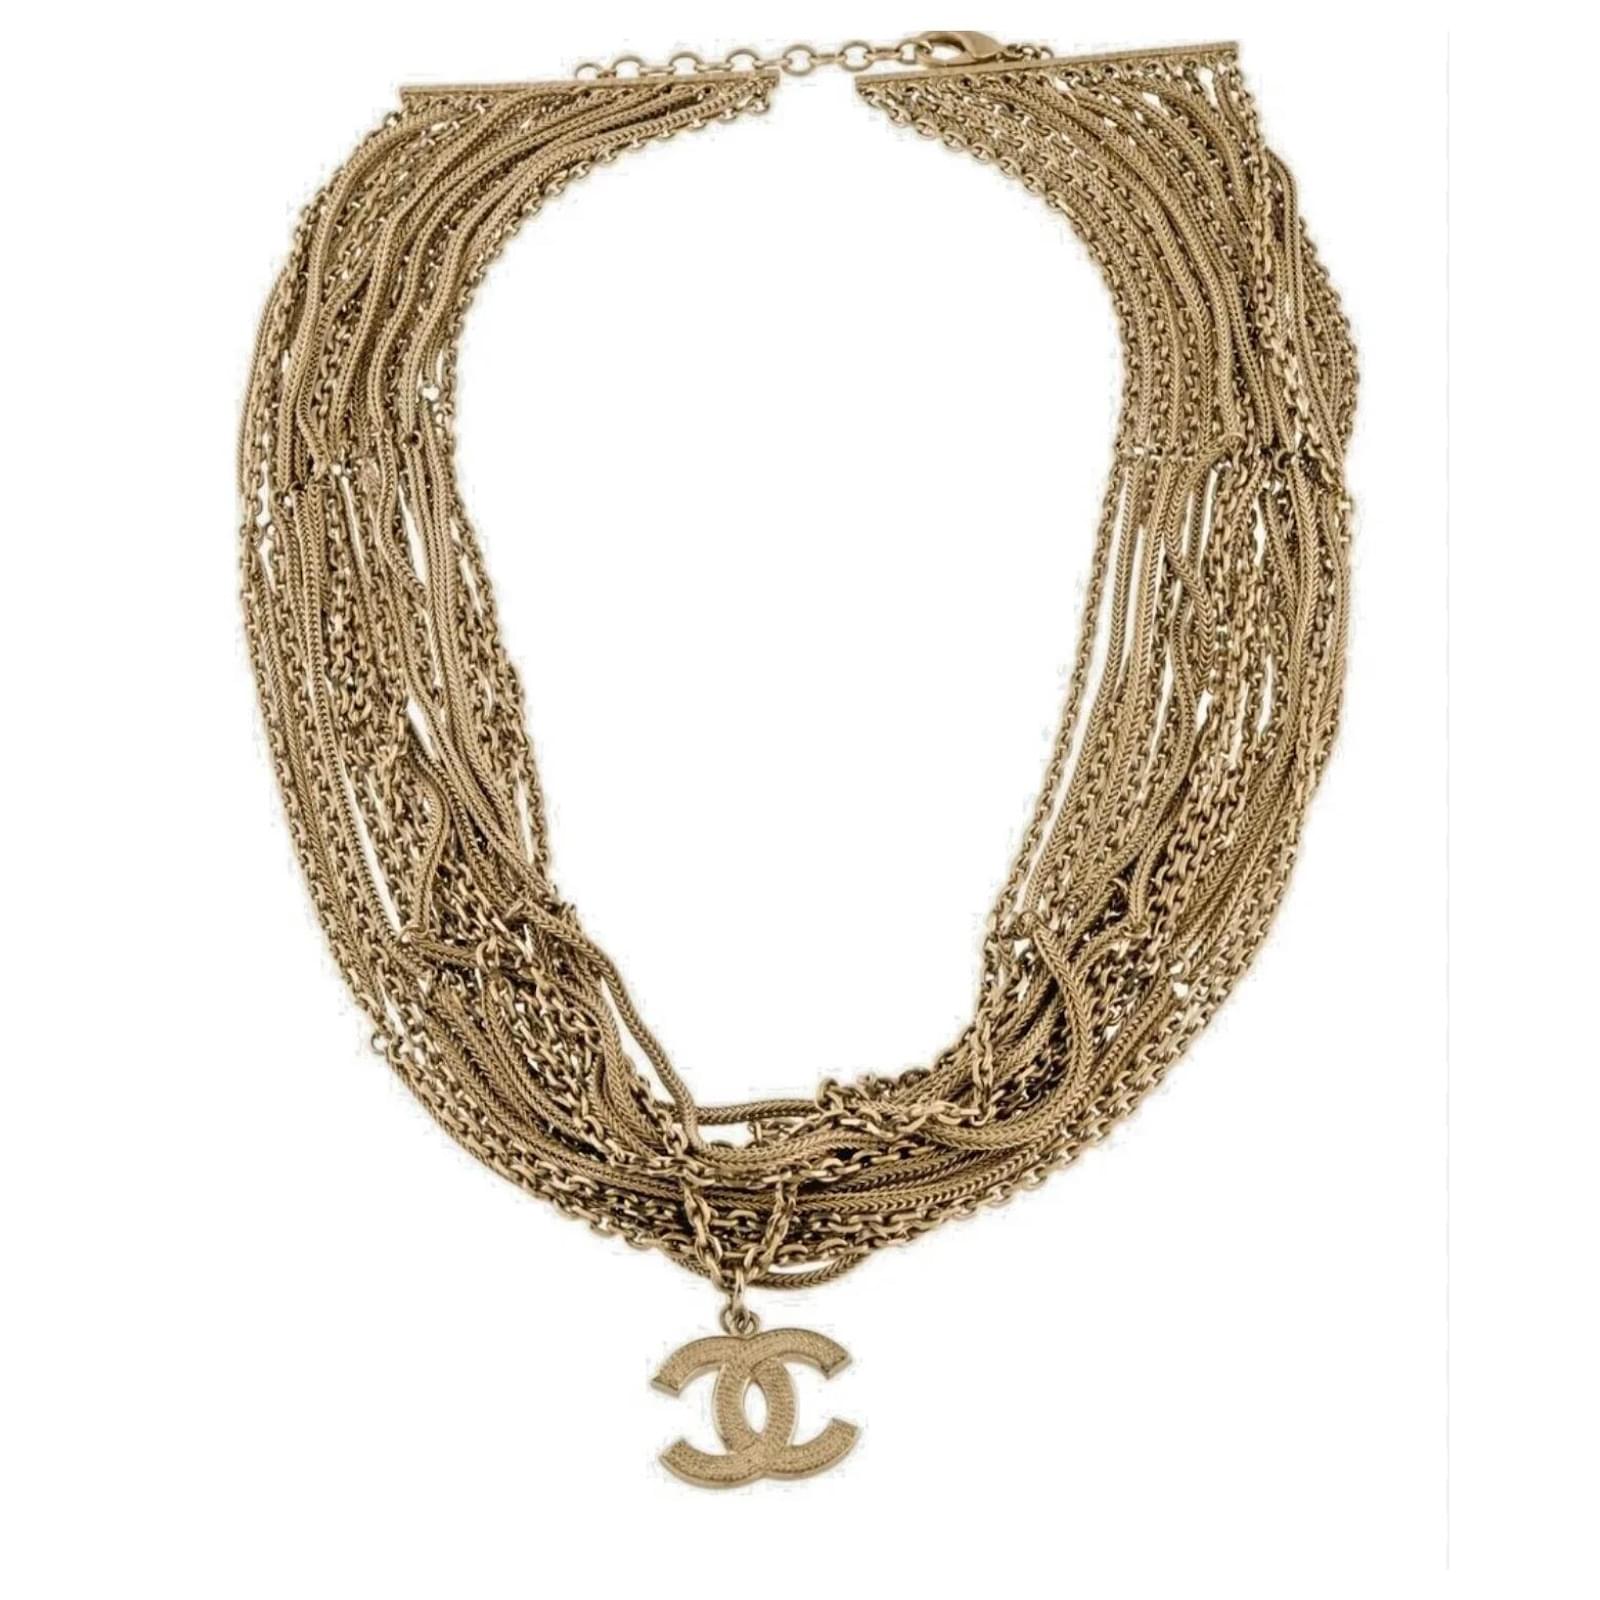 CHANEL, Jewelry, Chanel Lambskin Crystal Double Cc Chainlink Choker  Necklace